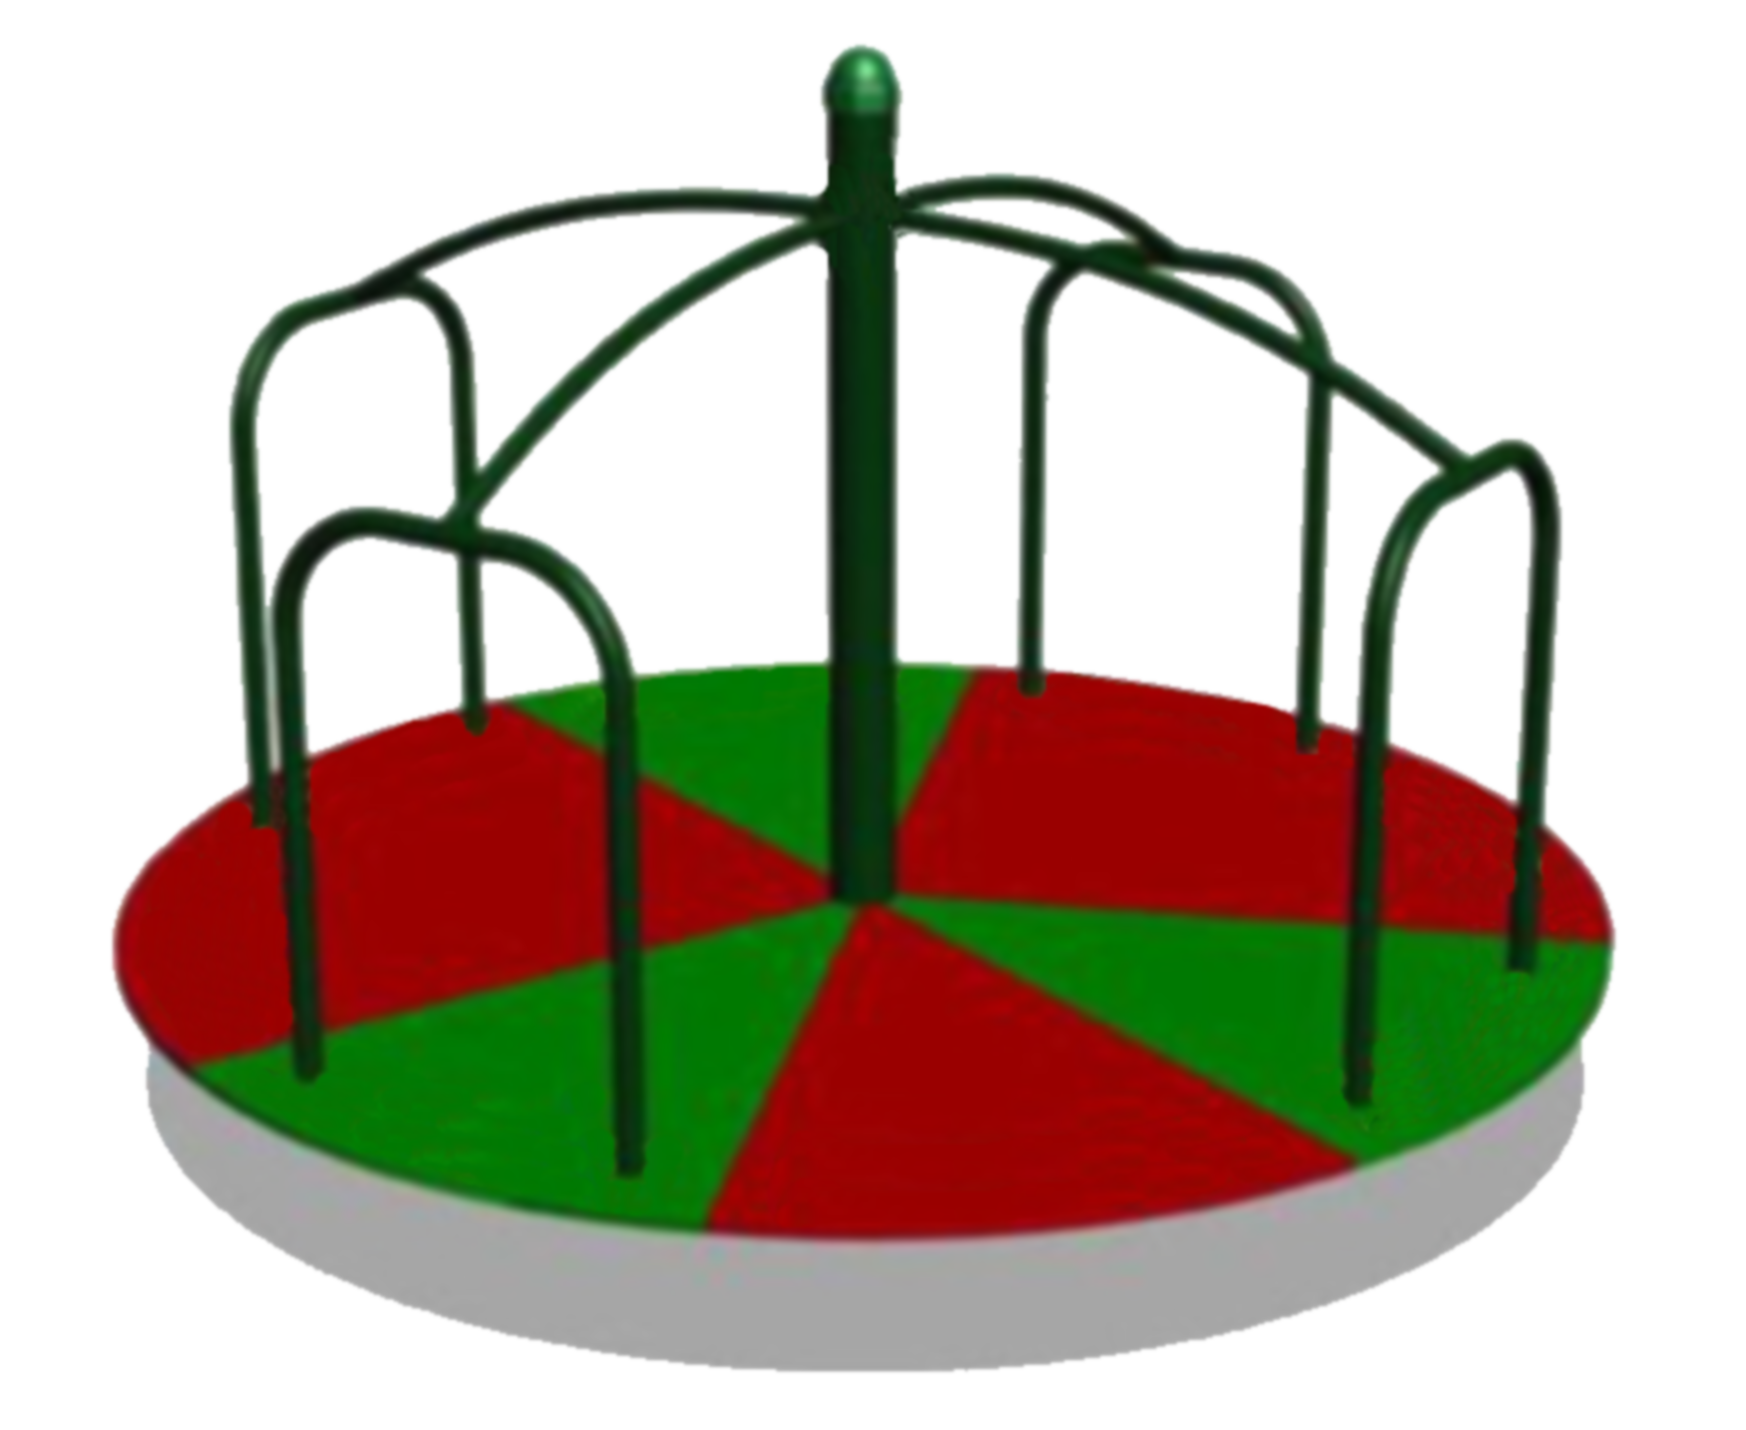 Outside playground clipart free images 3